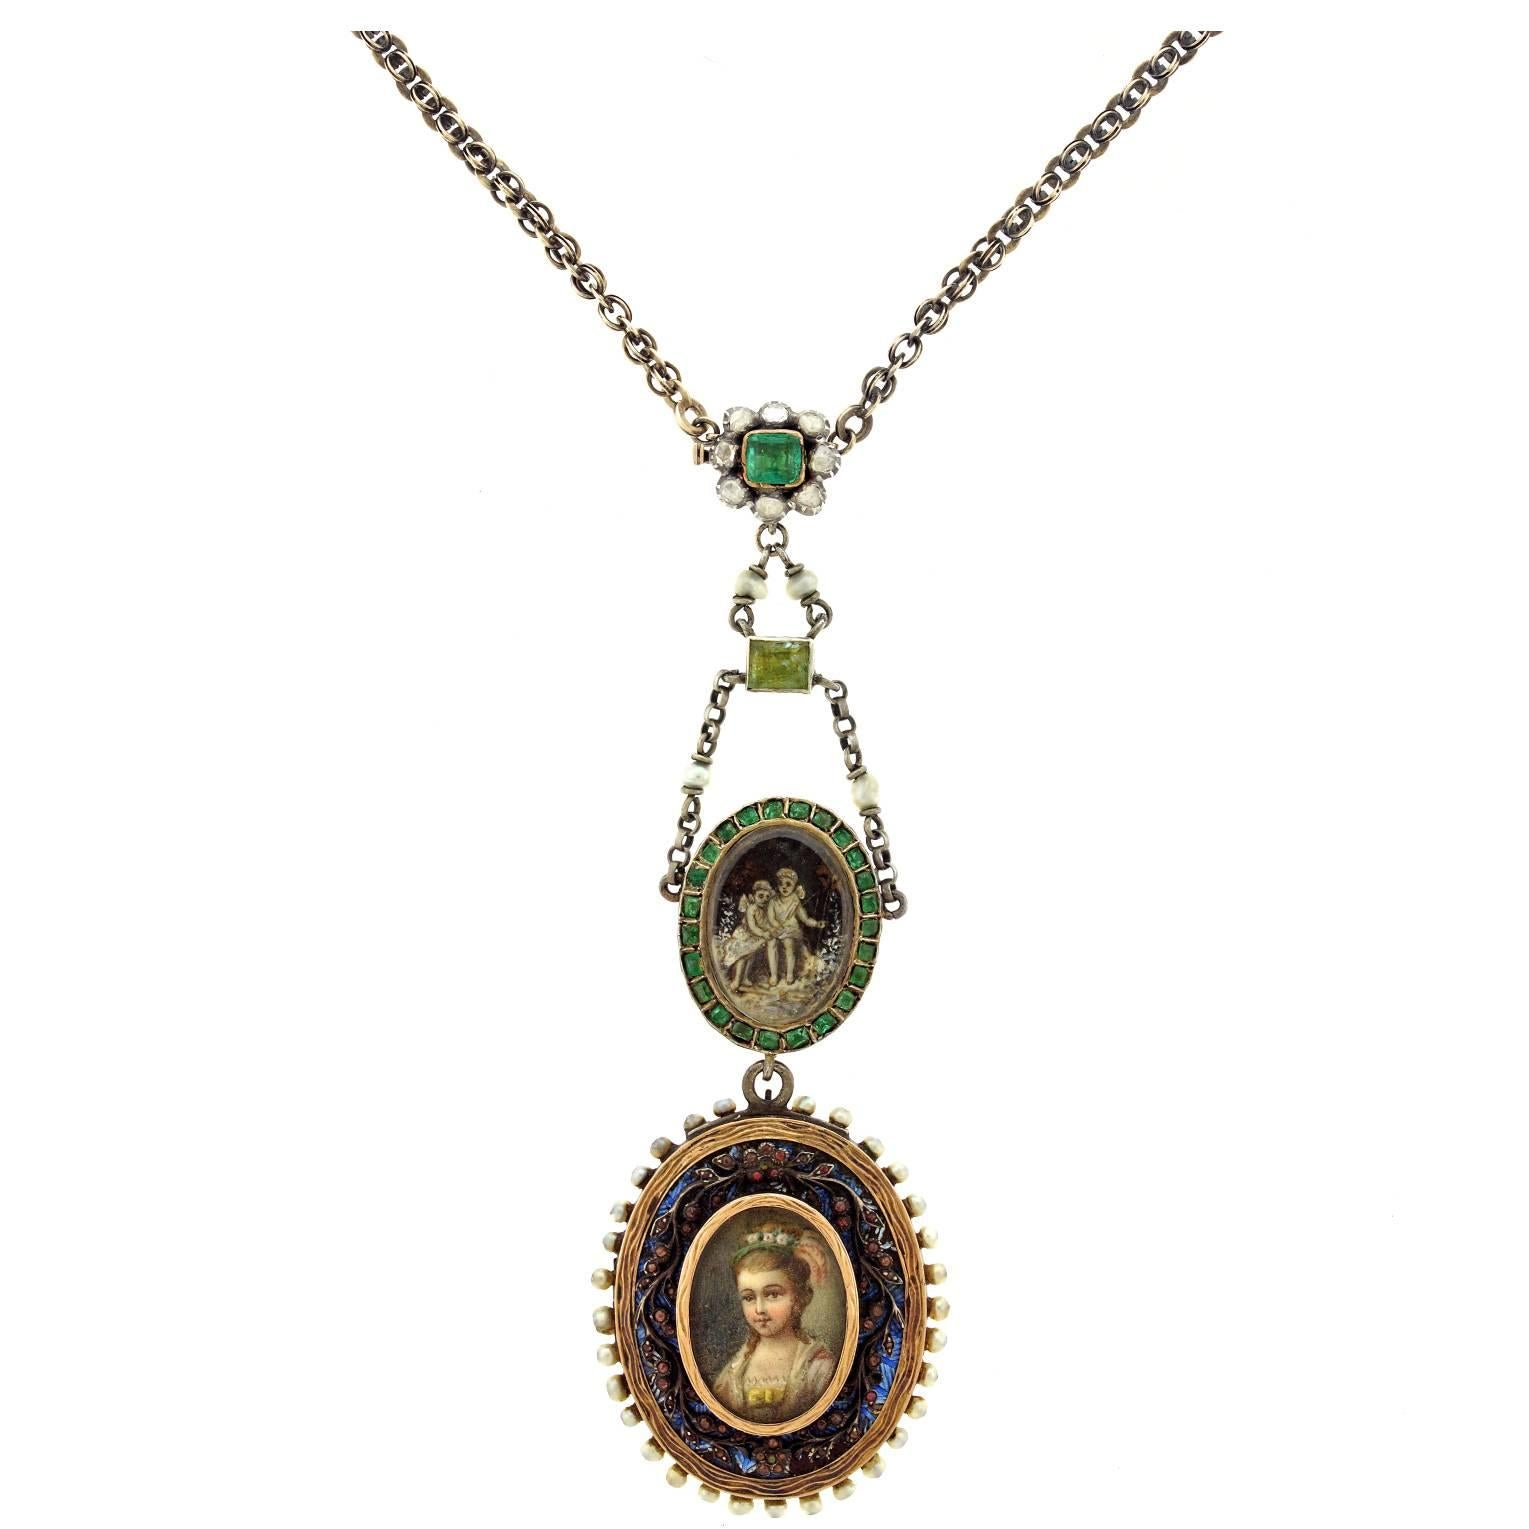 Circa 1820s, 1860s, 1880s, 14k & 14k/silver. This stunning one-of-a-kind creation is a marriage of five antique elements. Featuring an early-Victorian hand-painted portrait as its focal point, the necklace also includes artwork of two cherubs,